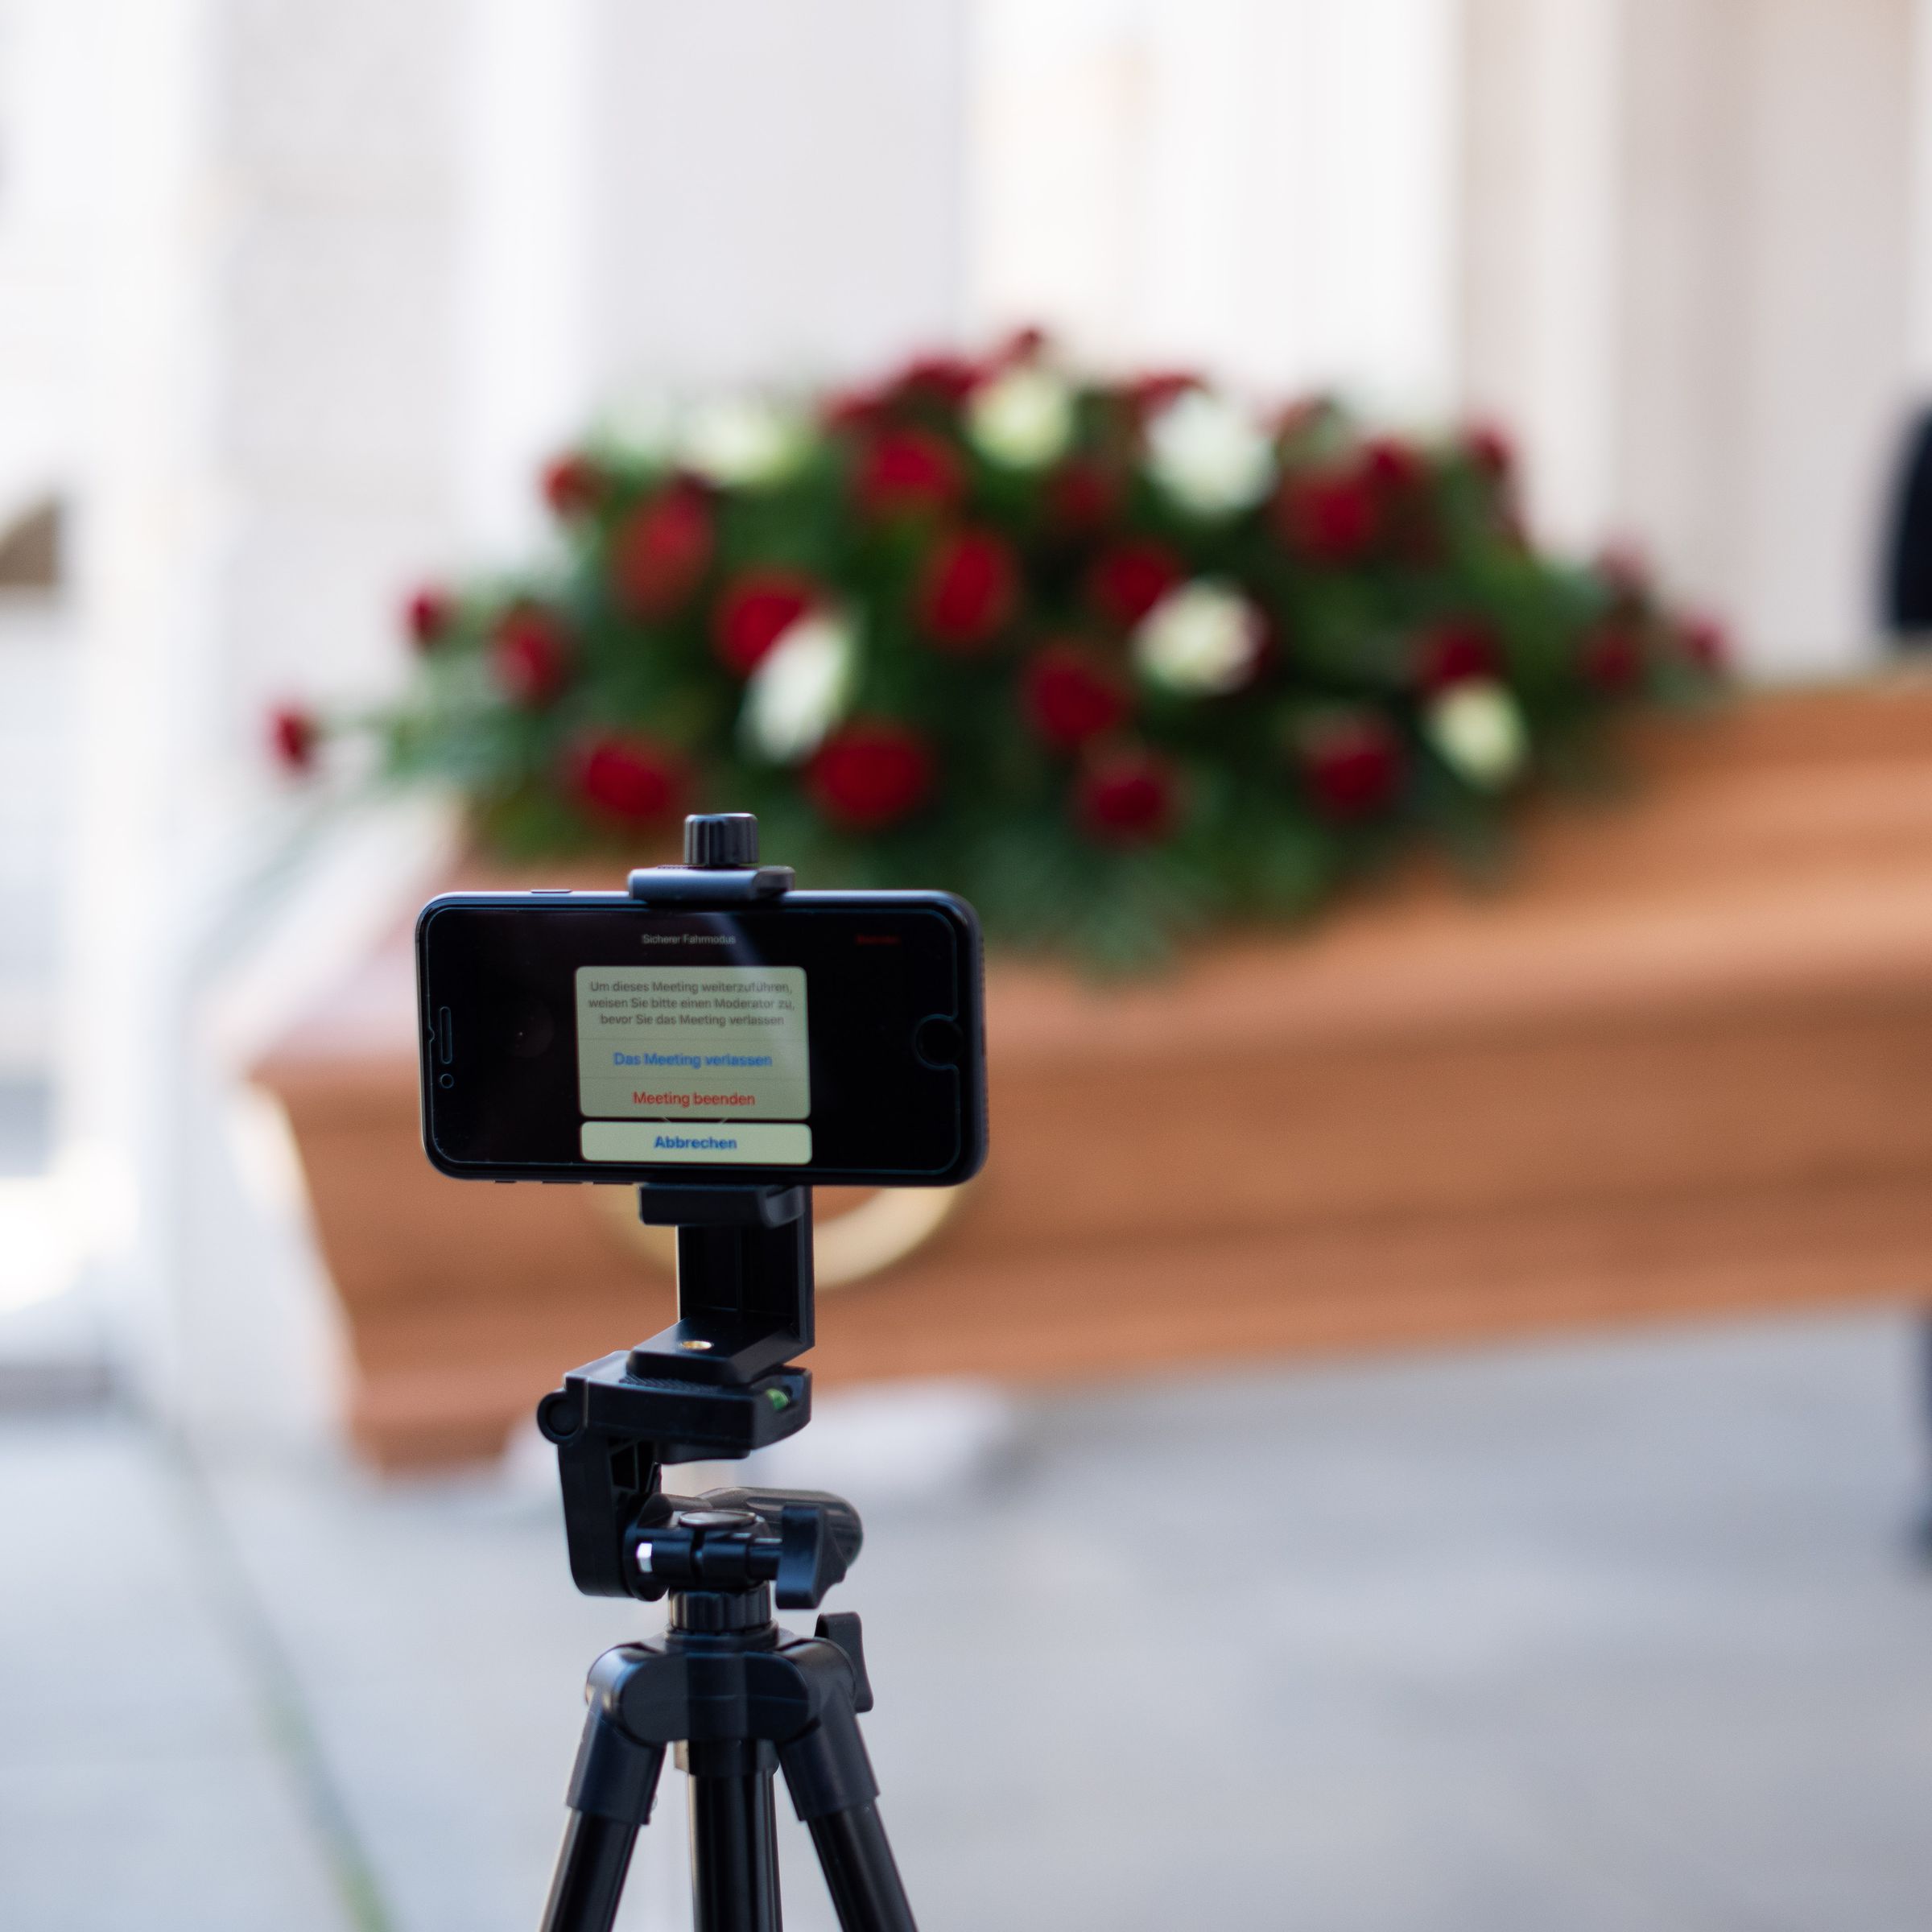 Undertakers Offer Livestreaming For Funerals Following Coronavirus Restrictions